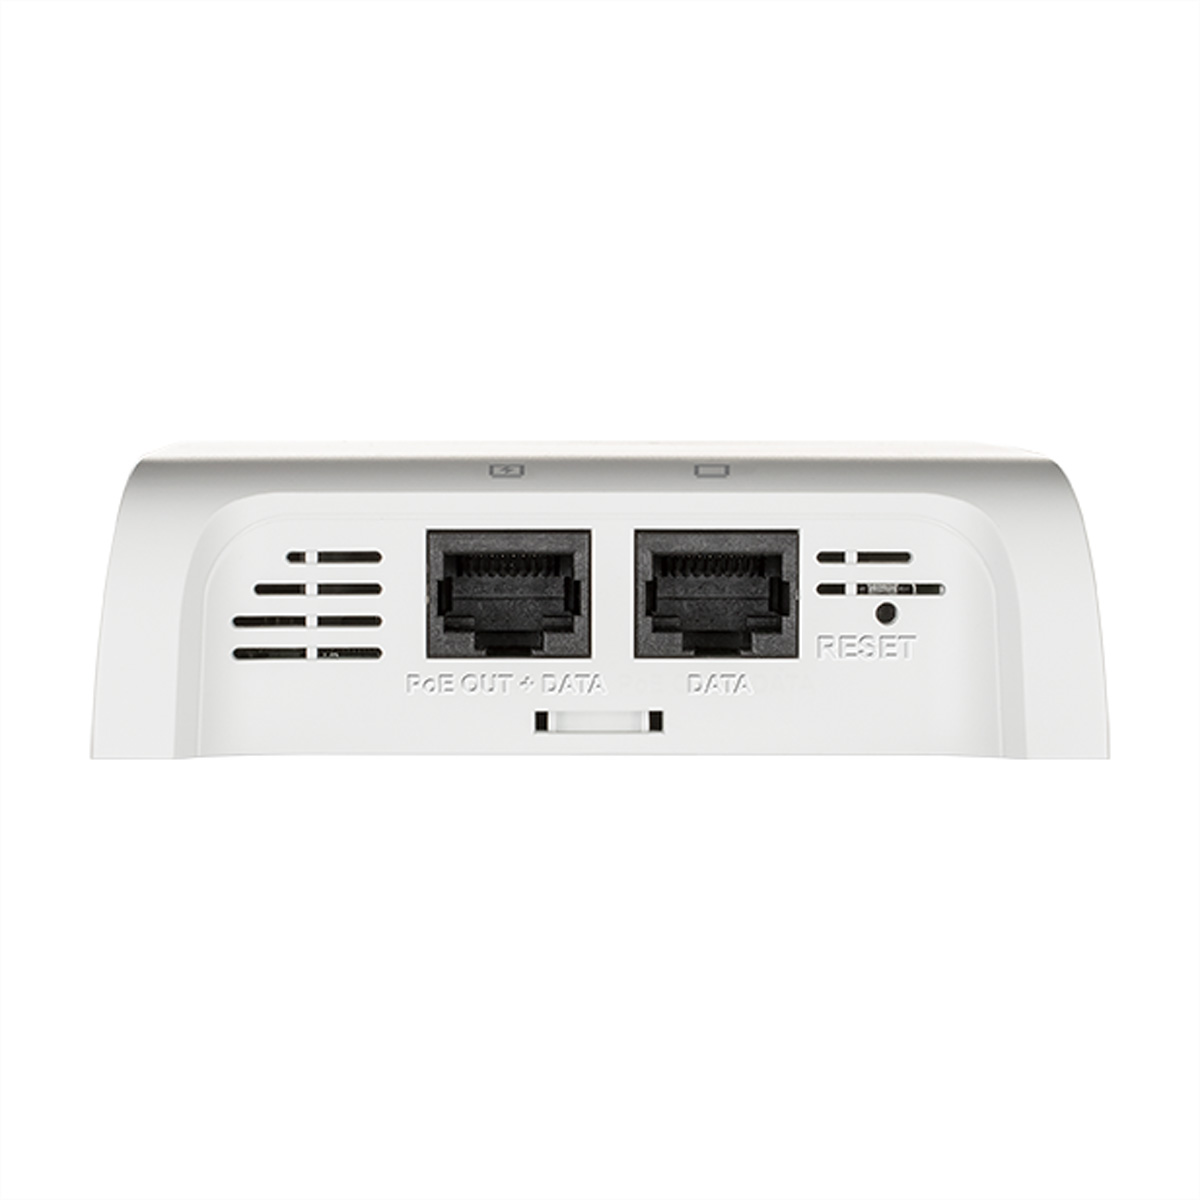 D-LINK Wireless Wave Points In-Wall DAP-2622 AC1200 Gbit/s Access PoE Poin WLAN 1,2 2 Access